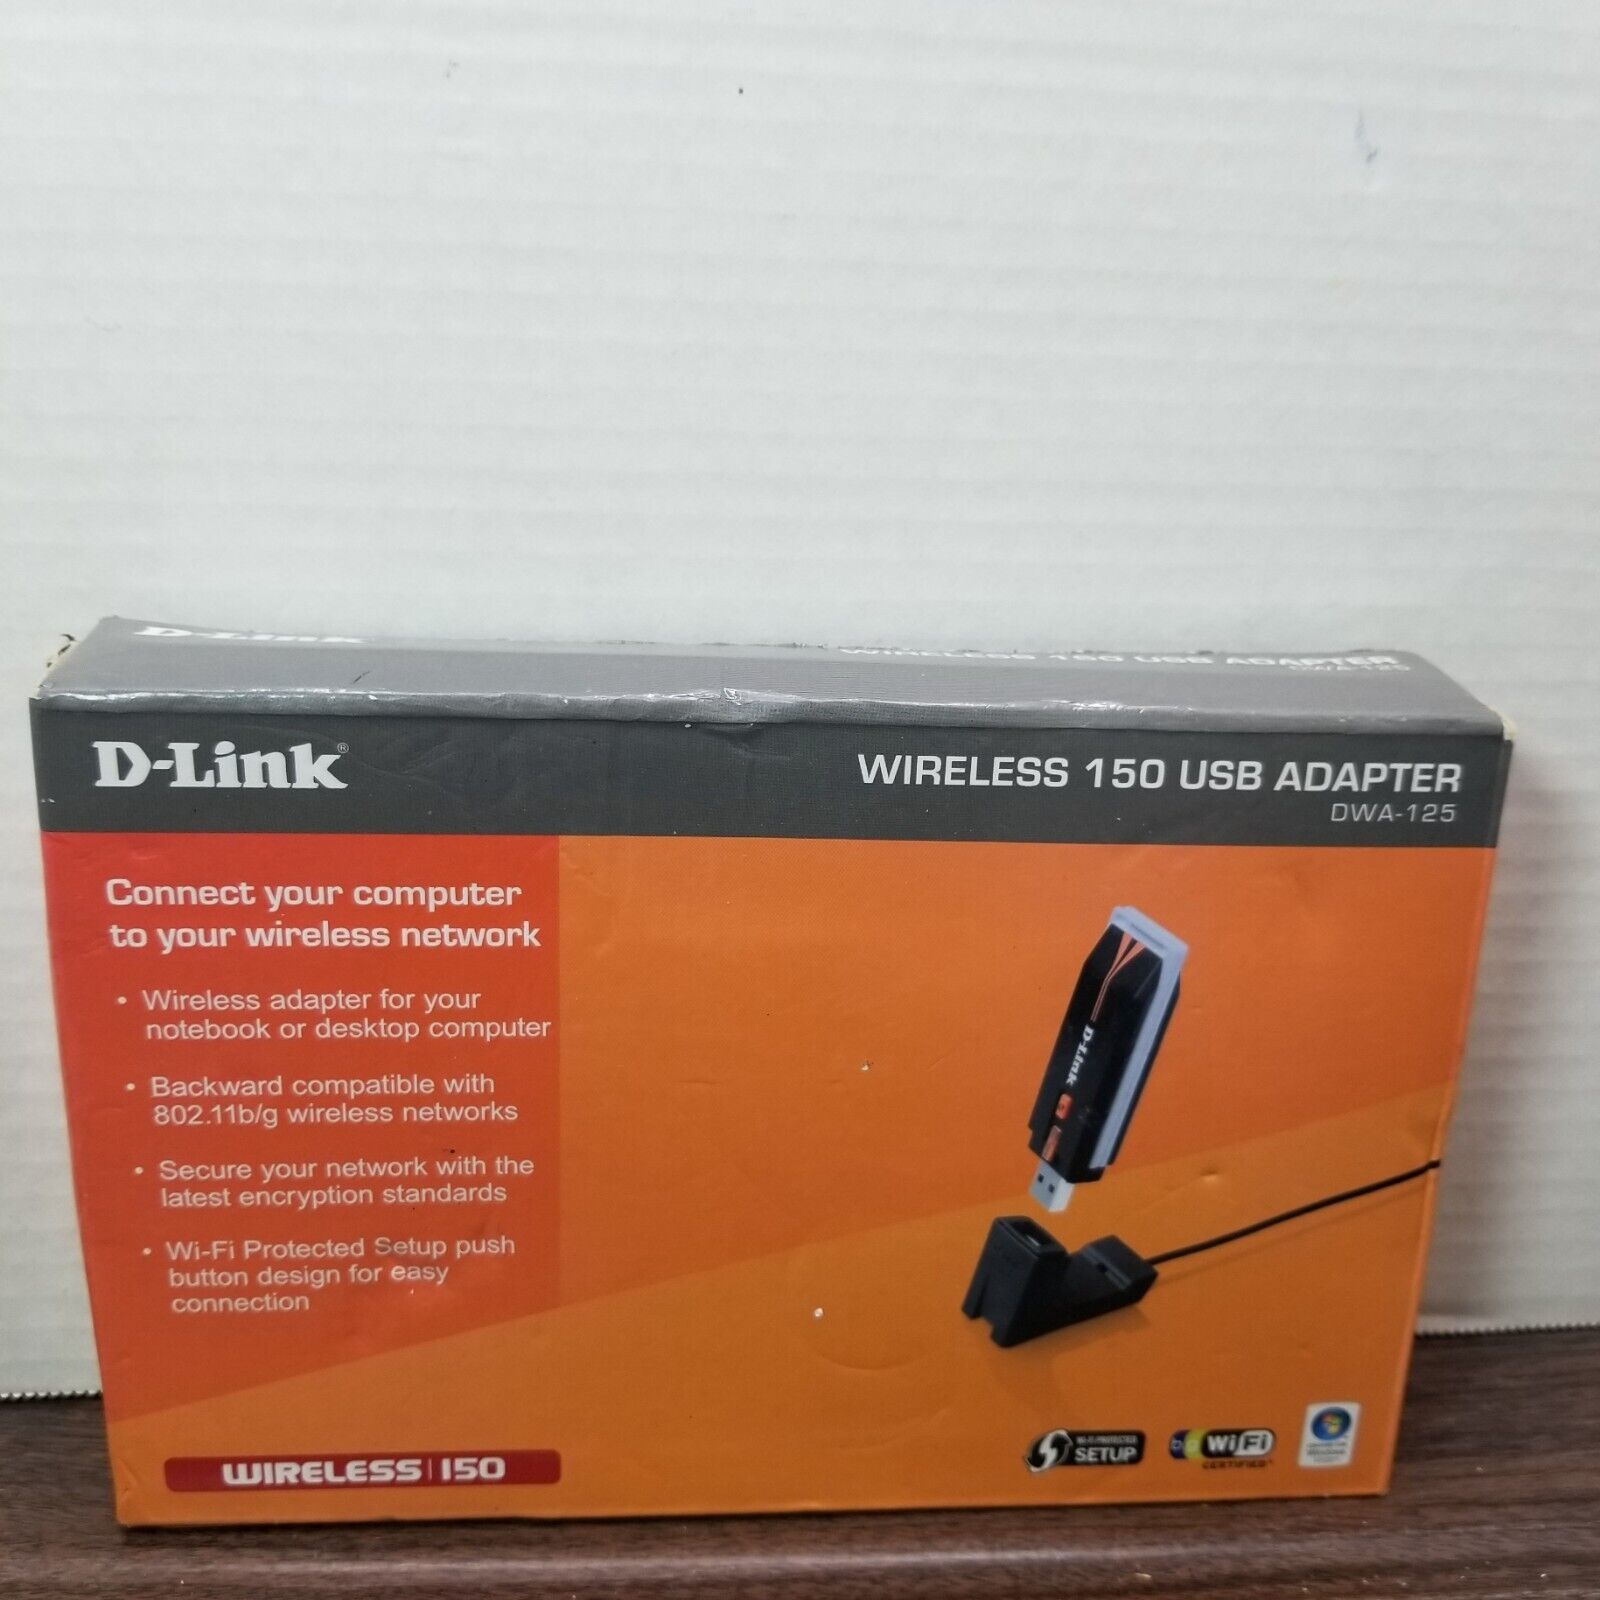 D-link DWA-125 Wireless N 150 USB Adapter Tested and Works. - $10.04